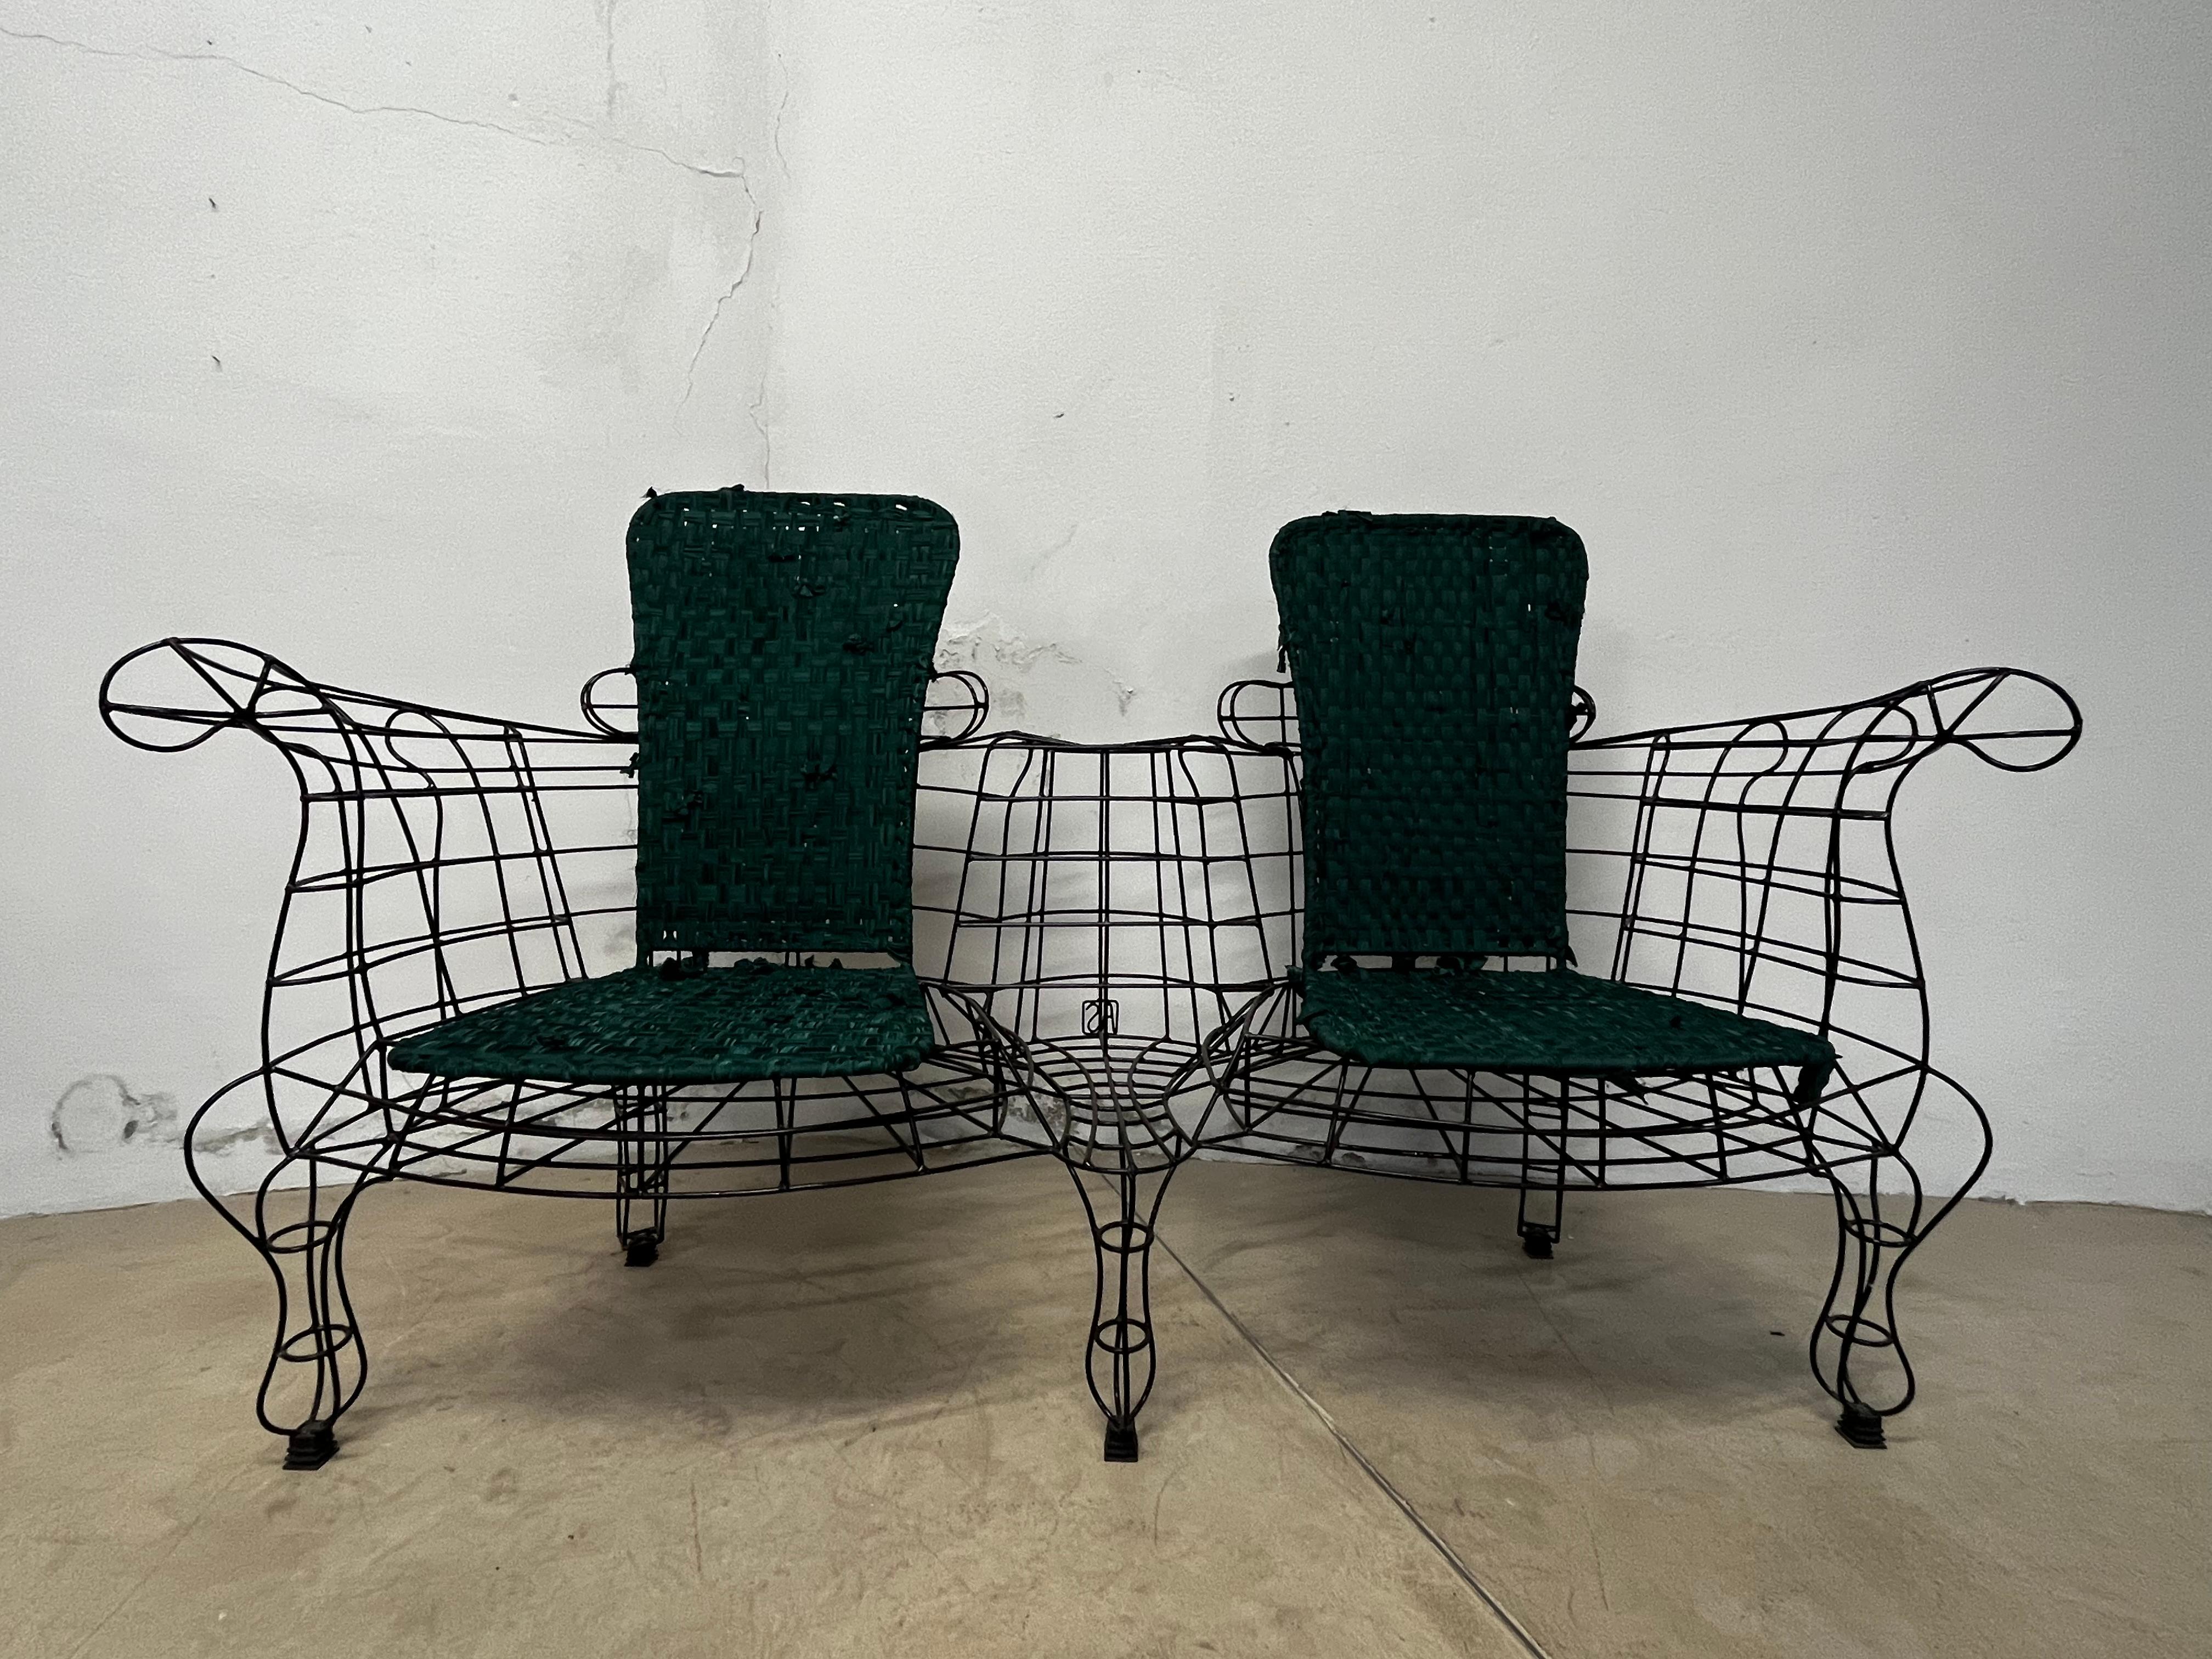 MARIA sofa + joker designed by Anacleto Spazzapan
Materials: Hand-welded iron rods, fabric
Dimensions: 60 x 160 x h 93 cm

The MARIA sofa, by designer Anacleto Spazzapan, is a designer piece of furniture made entirely by hand with a metal rod + the